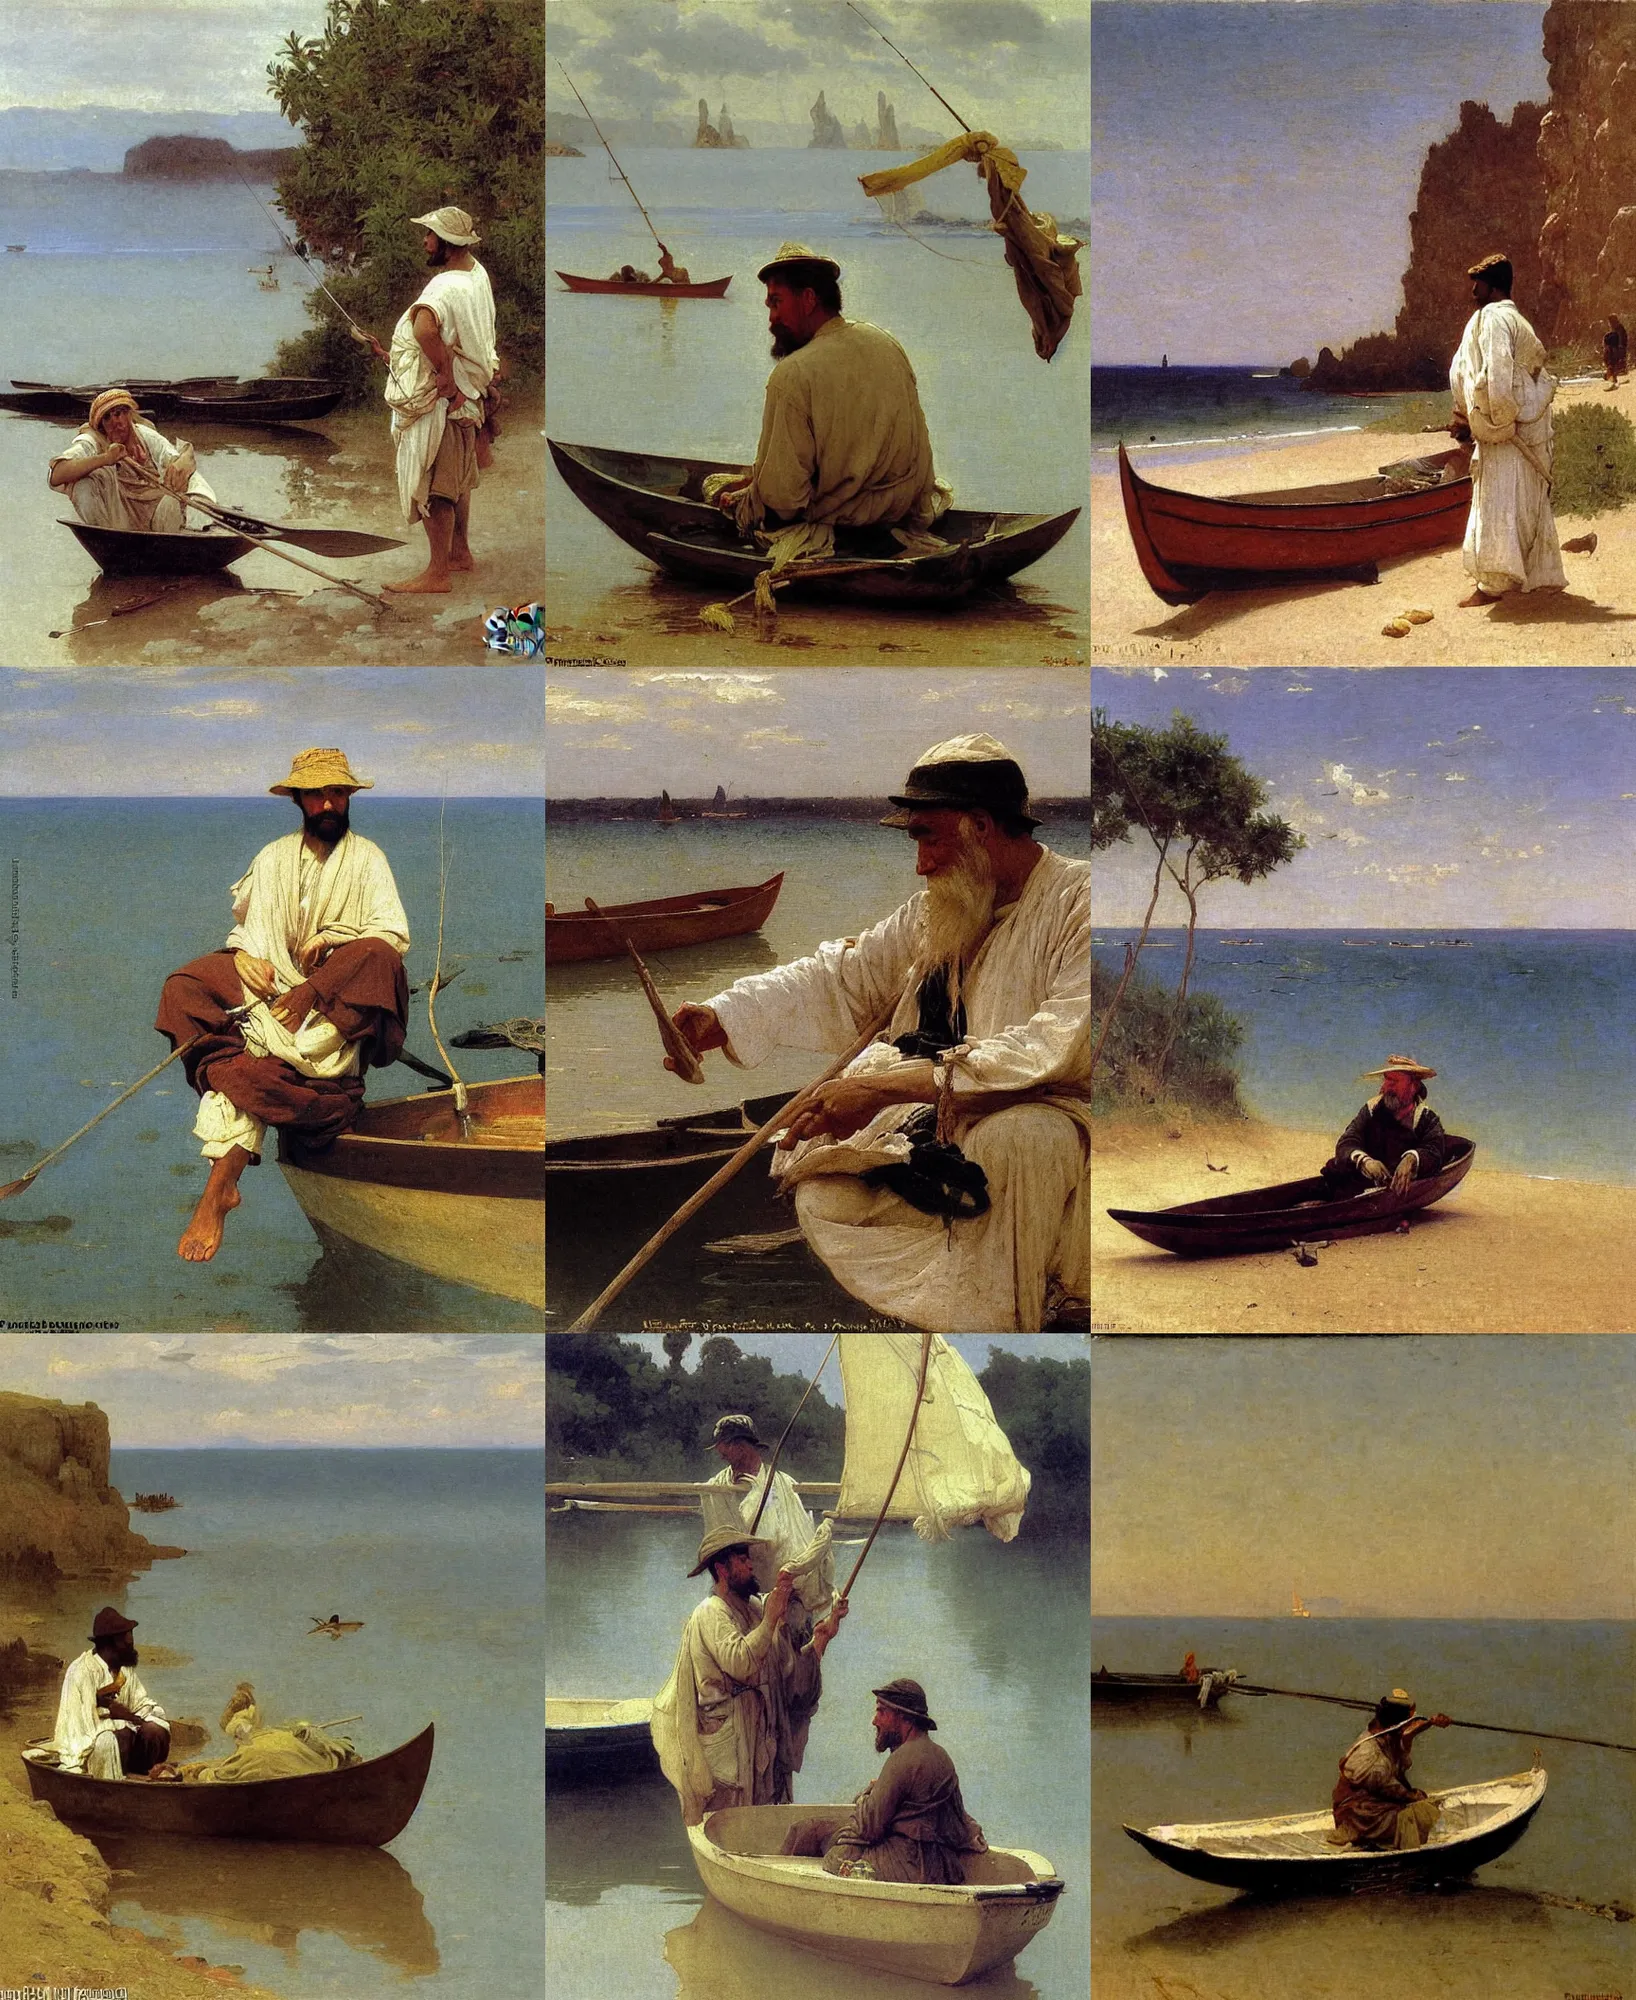 Prompt: painting of wise man as a fisherman on a small boat by the coast by bouguereau and ilya repin